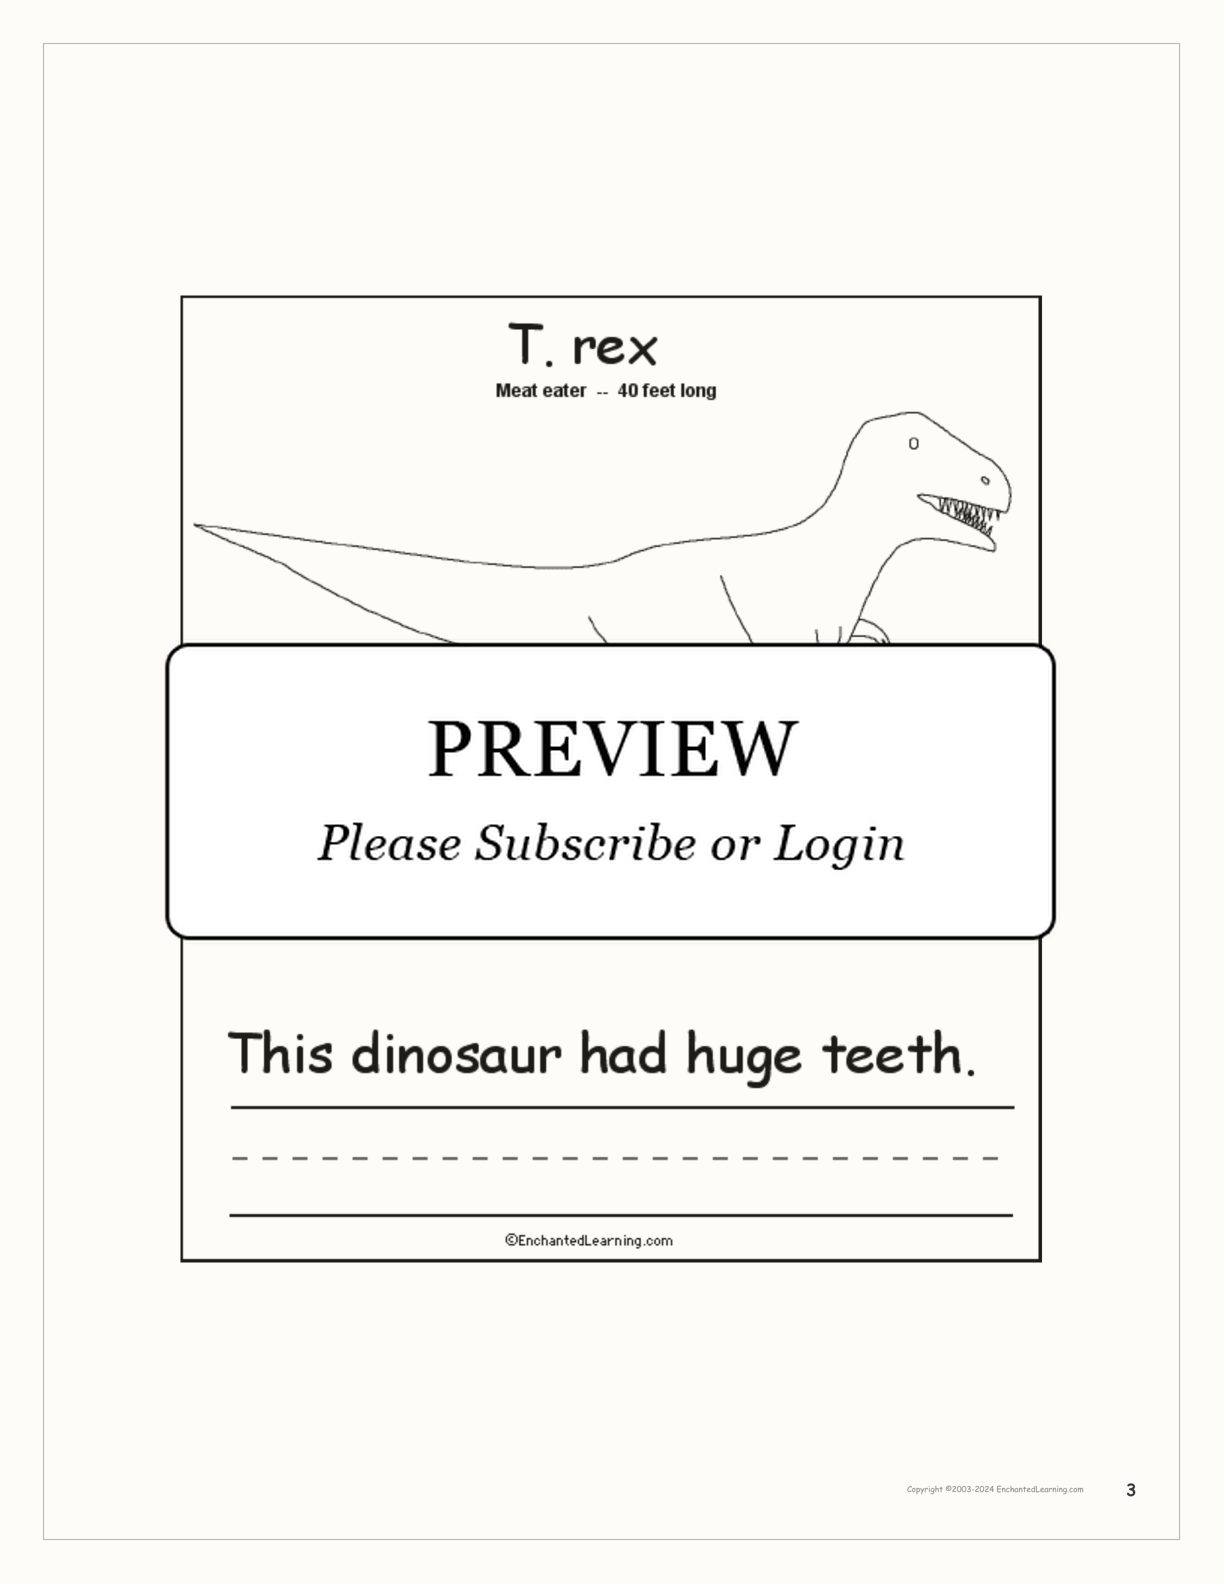 This Dinosaur... Early Reader Book interactive printout page 3